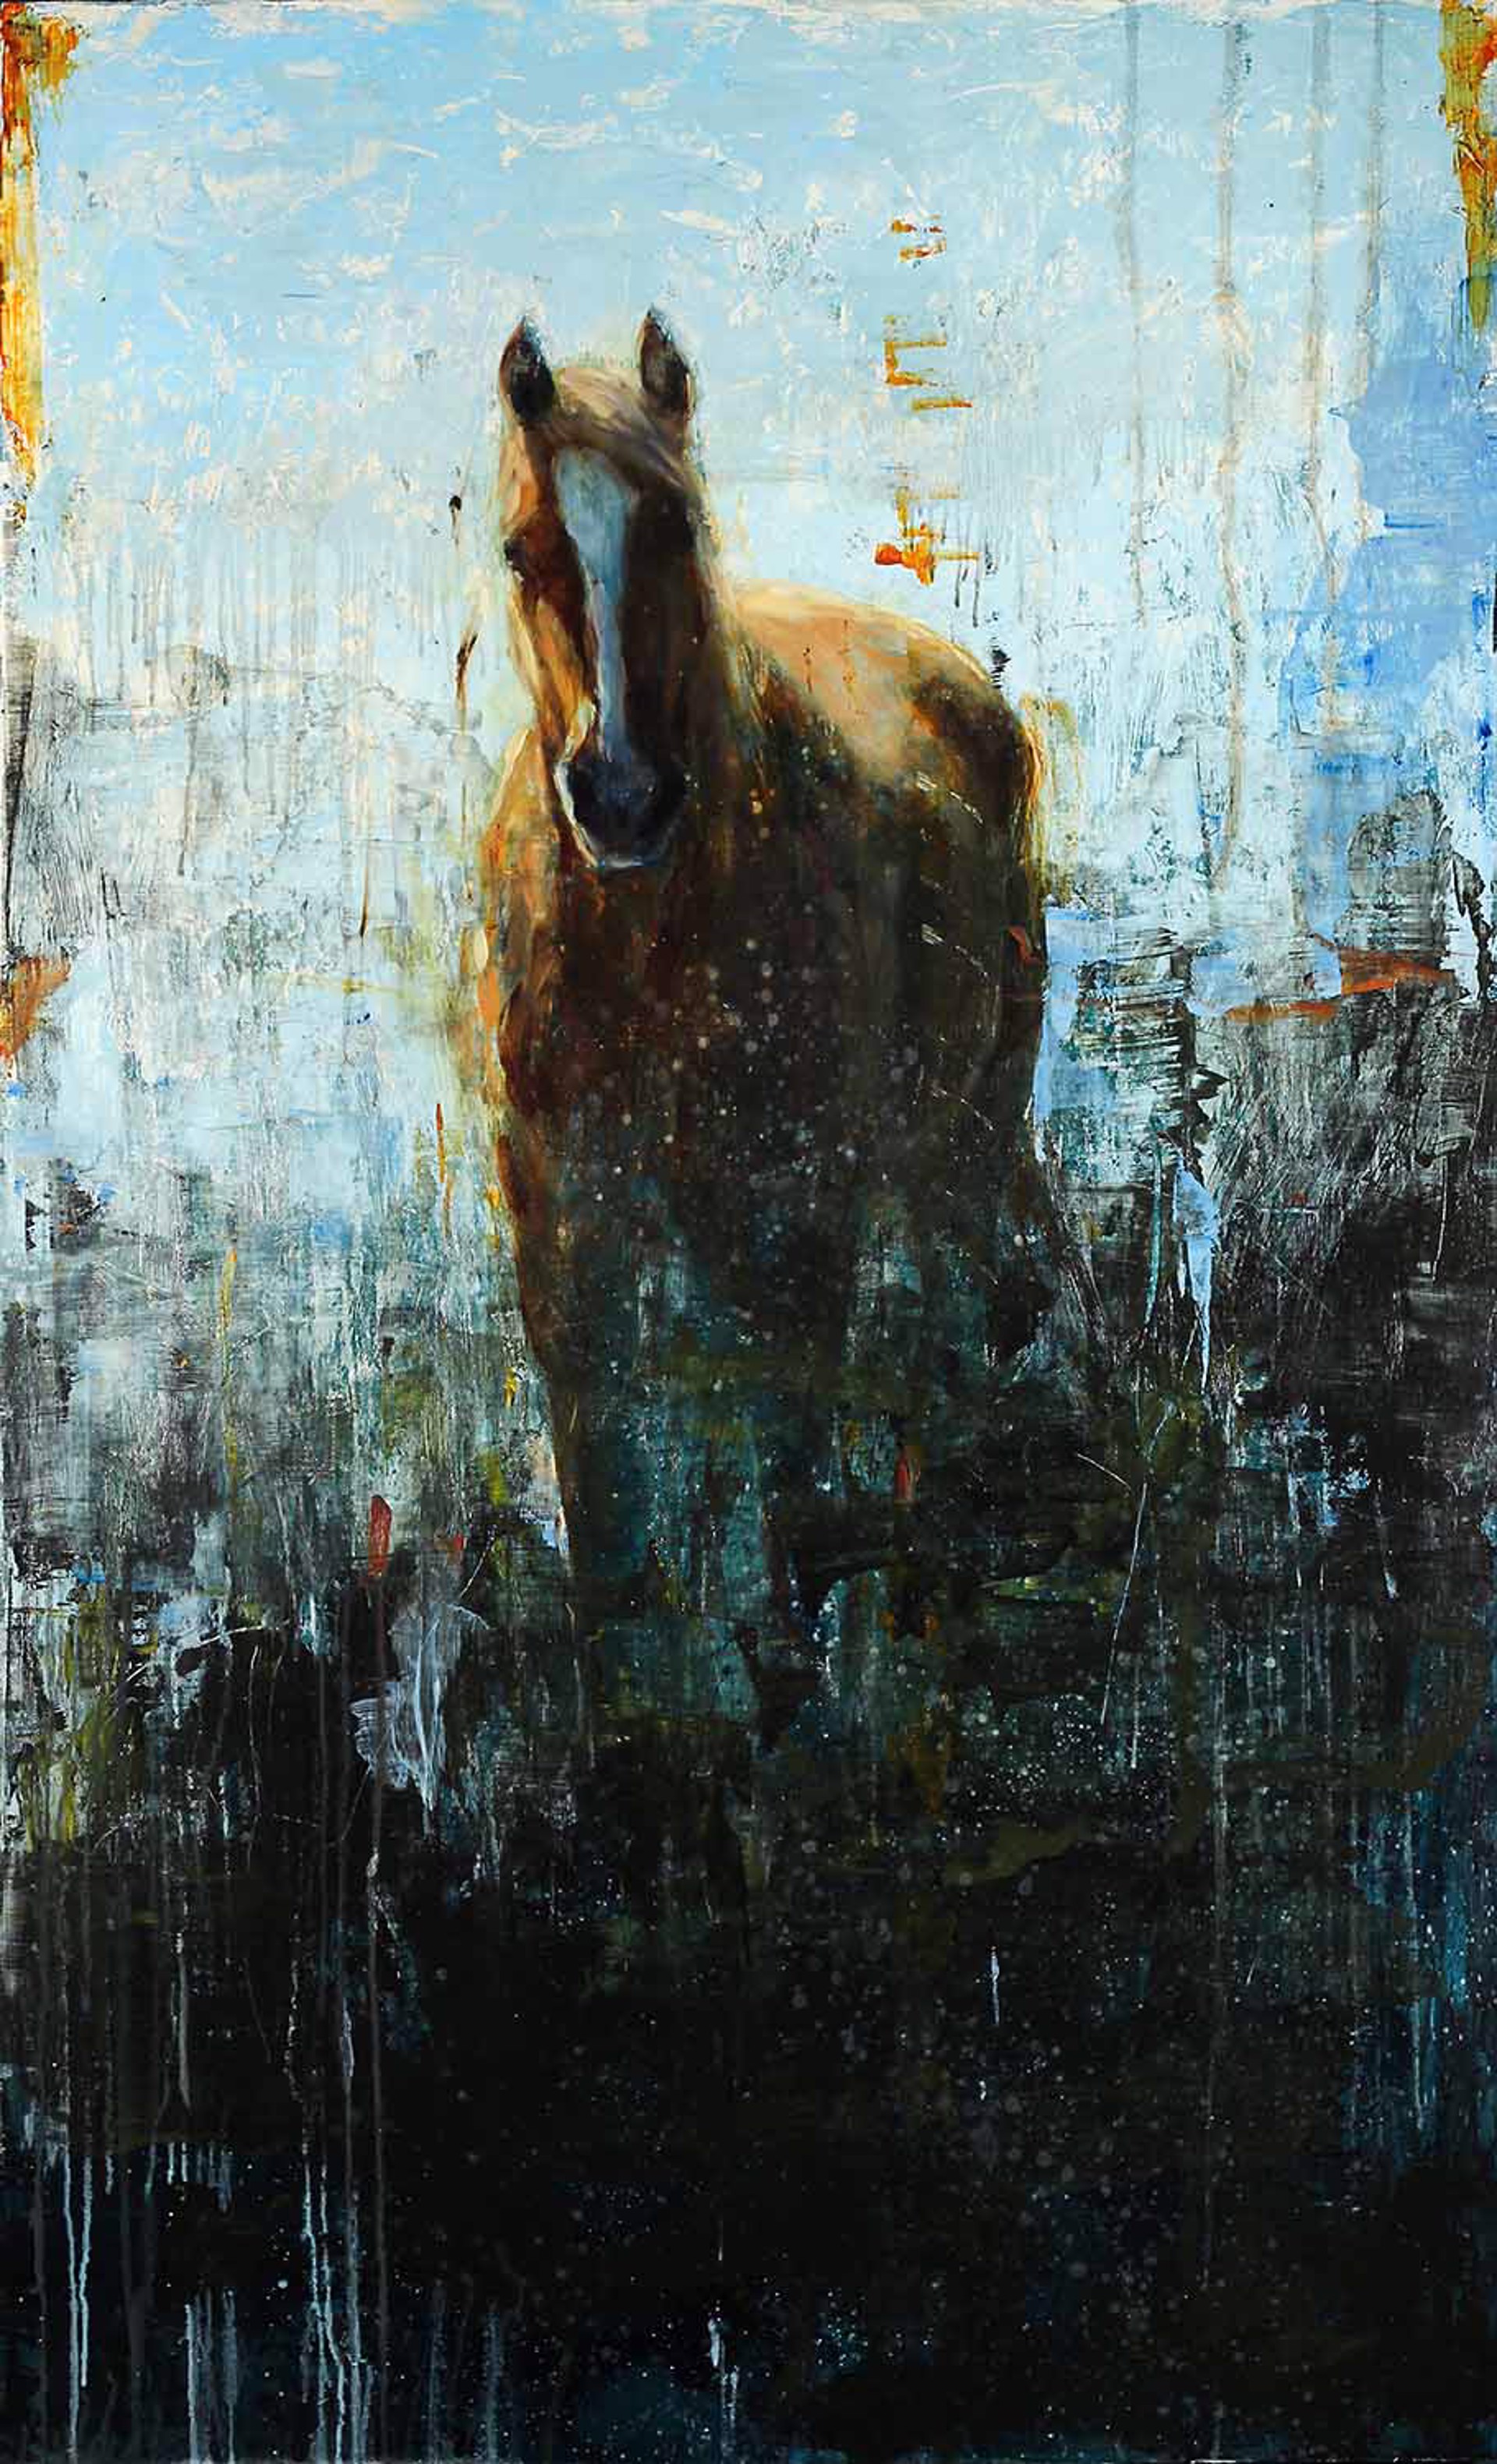 An Original Contemporary Fine Art Painting Of A Horse With A Blue and Black Abstract Background By Matt Flint Using Mixed Media On Panel